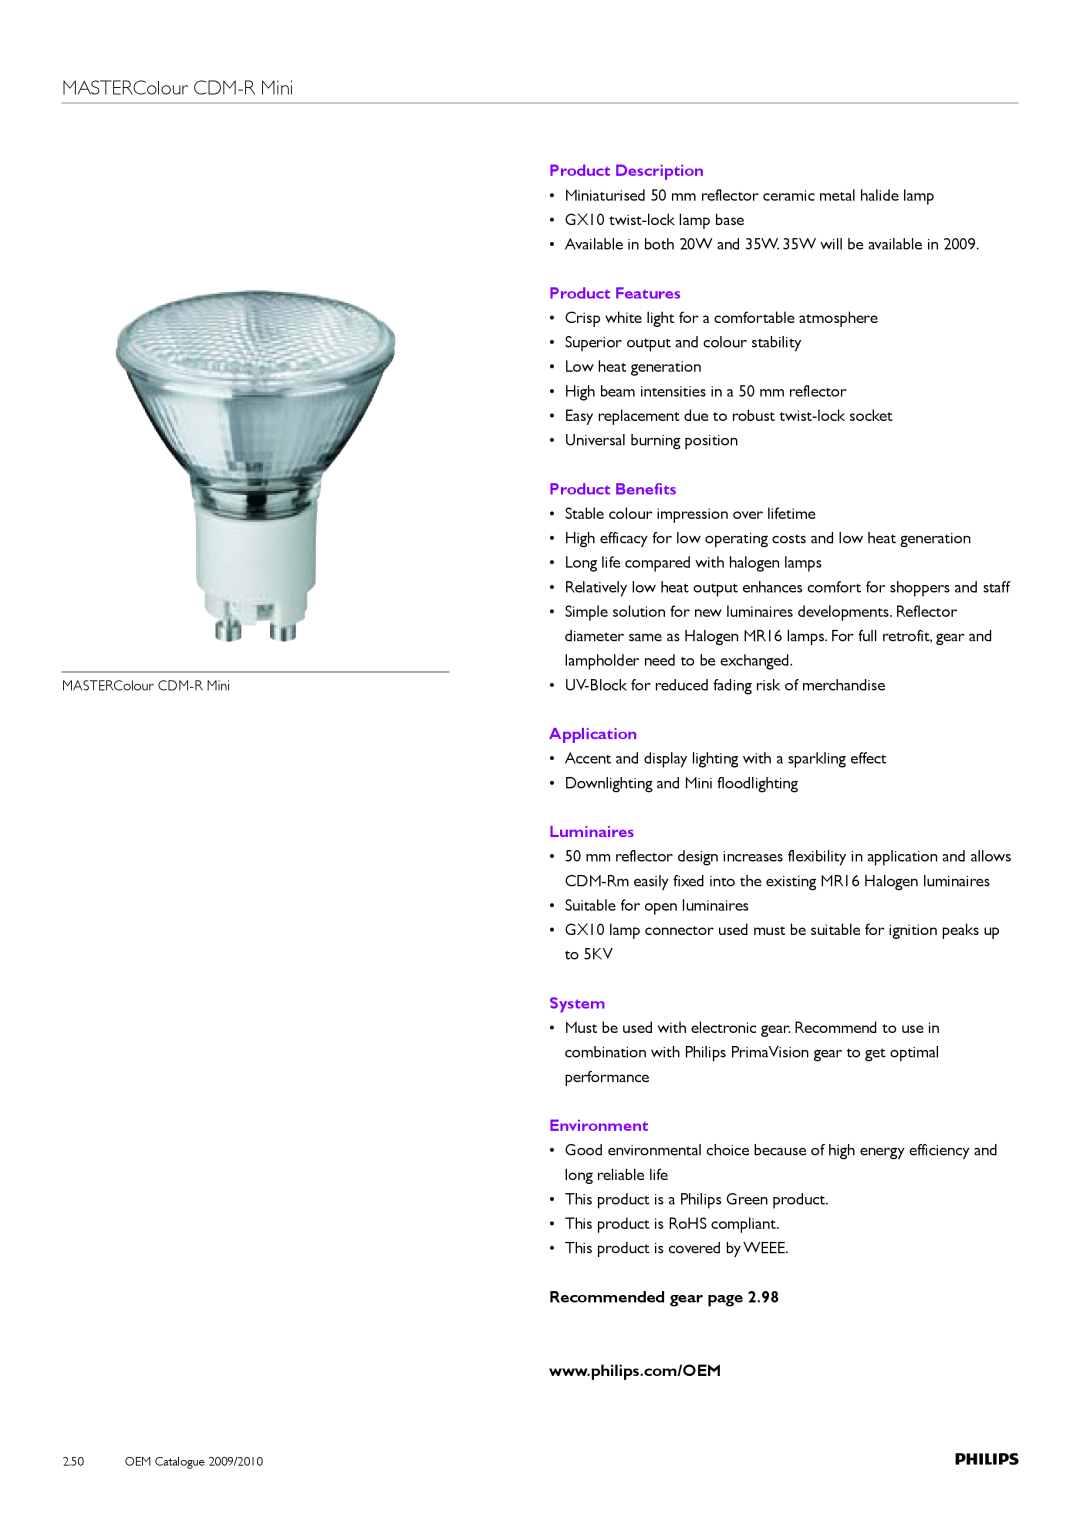 Philips Compact HID Lamp and Gear MASTERColour CDM-RMini, Product Description, Product Features, Product Benefits, System 